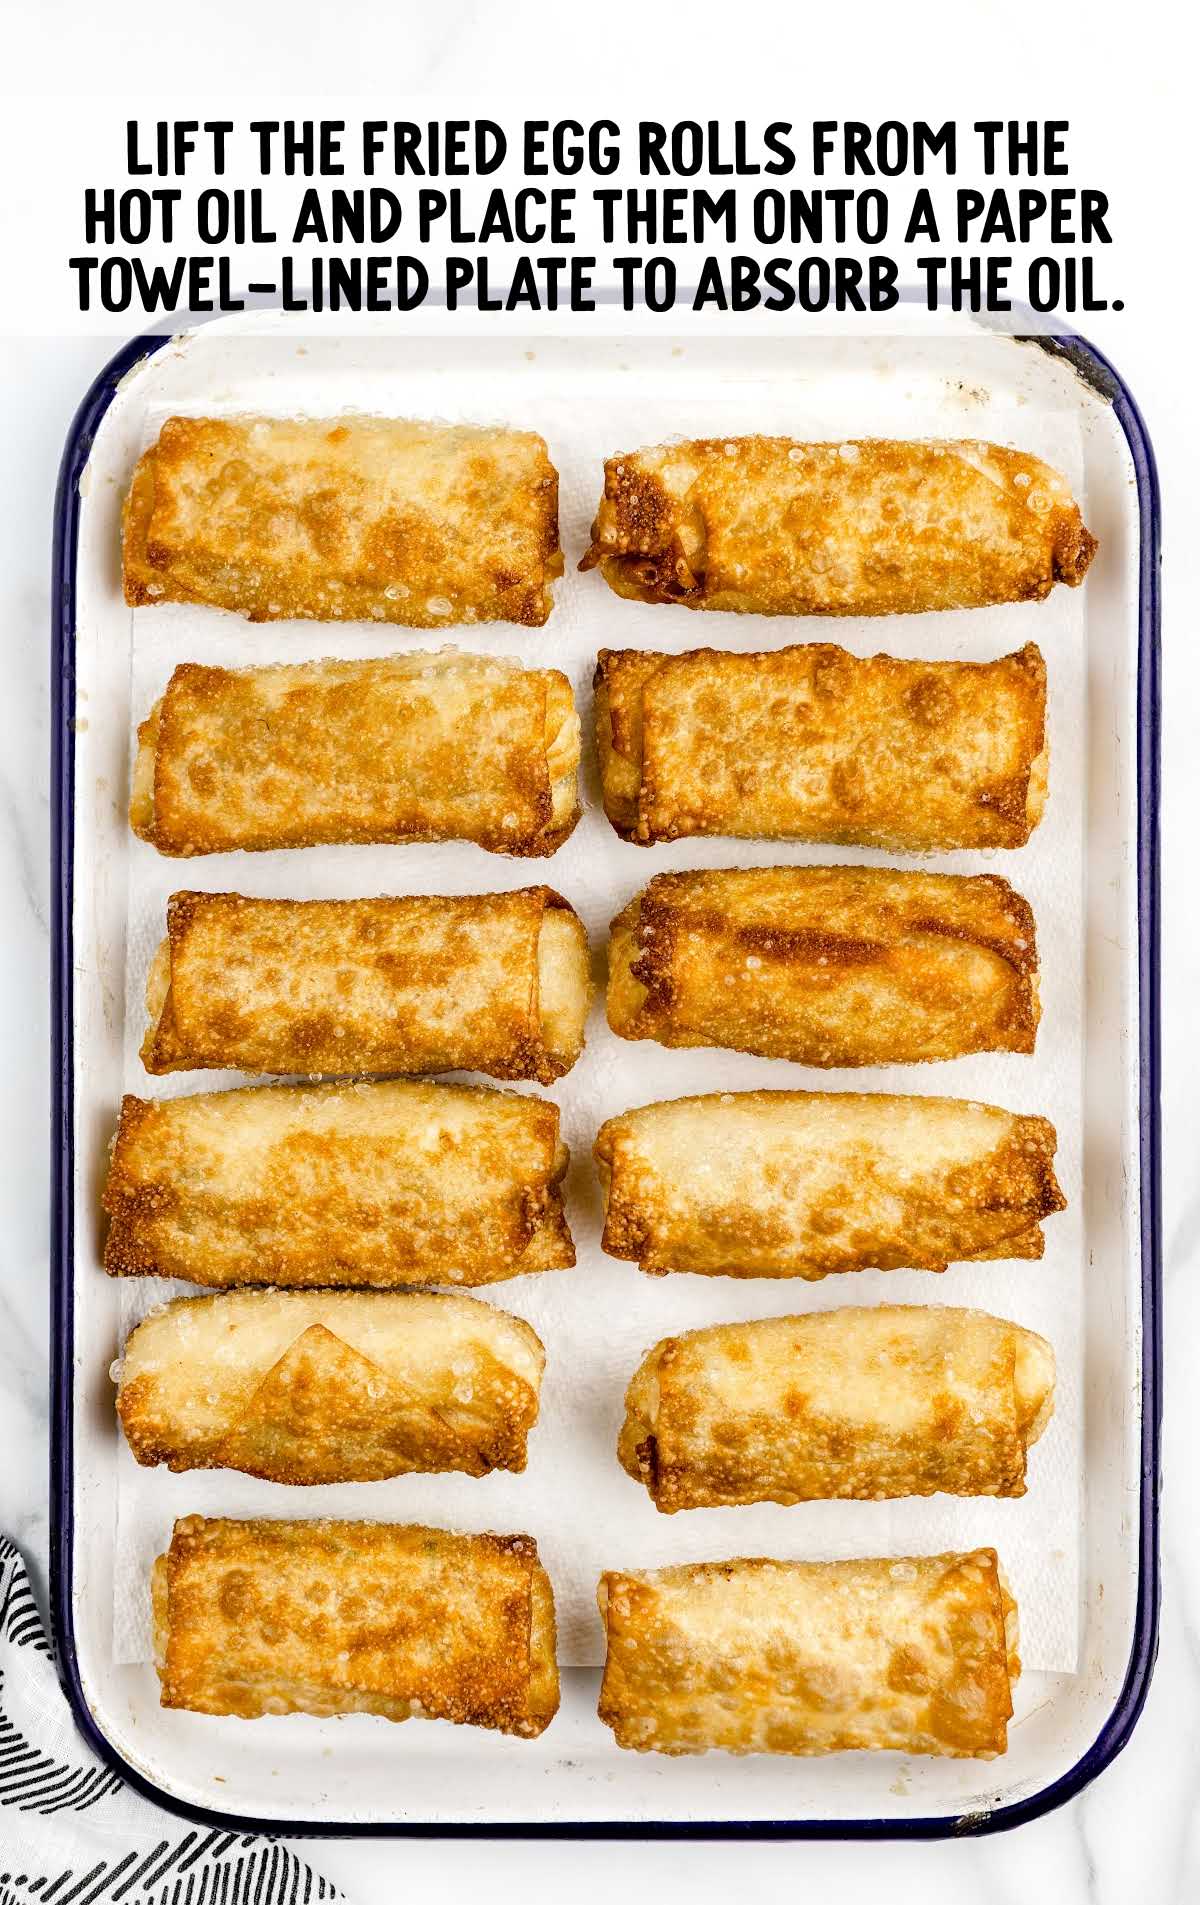 place egg rolls onto a paper towel